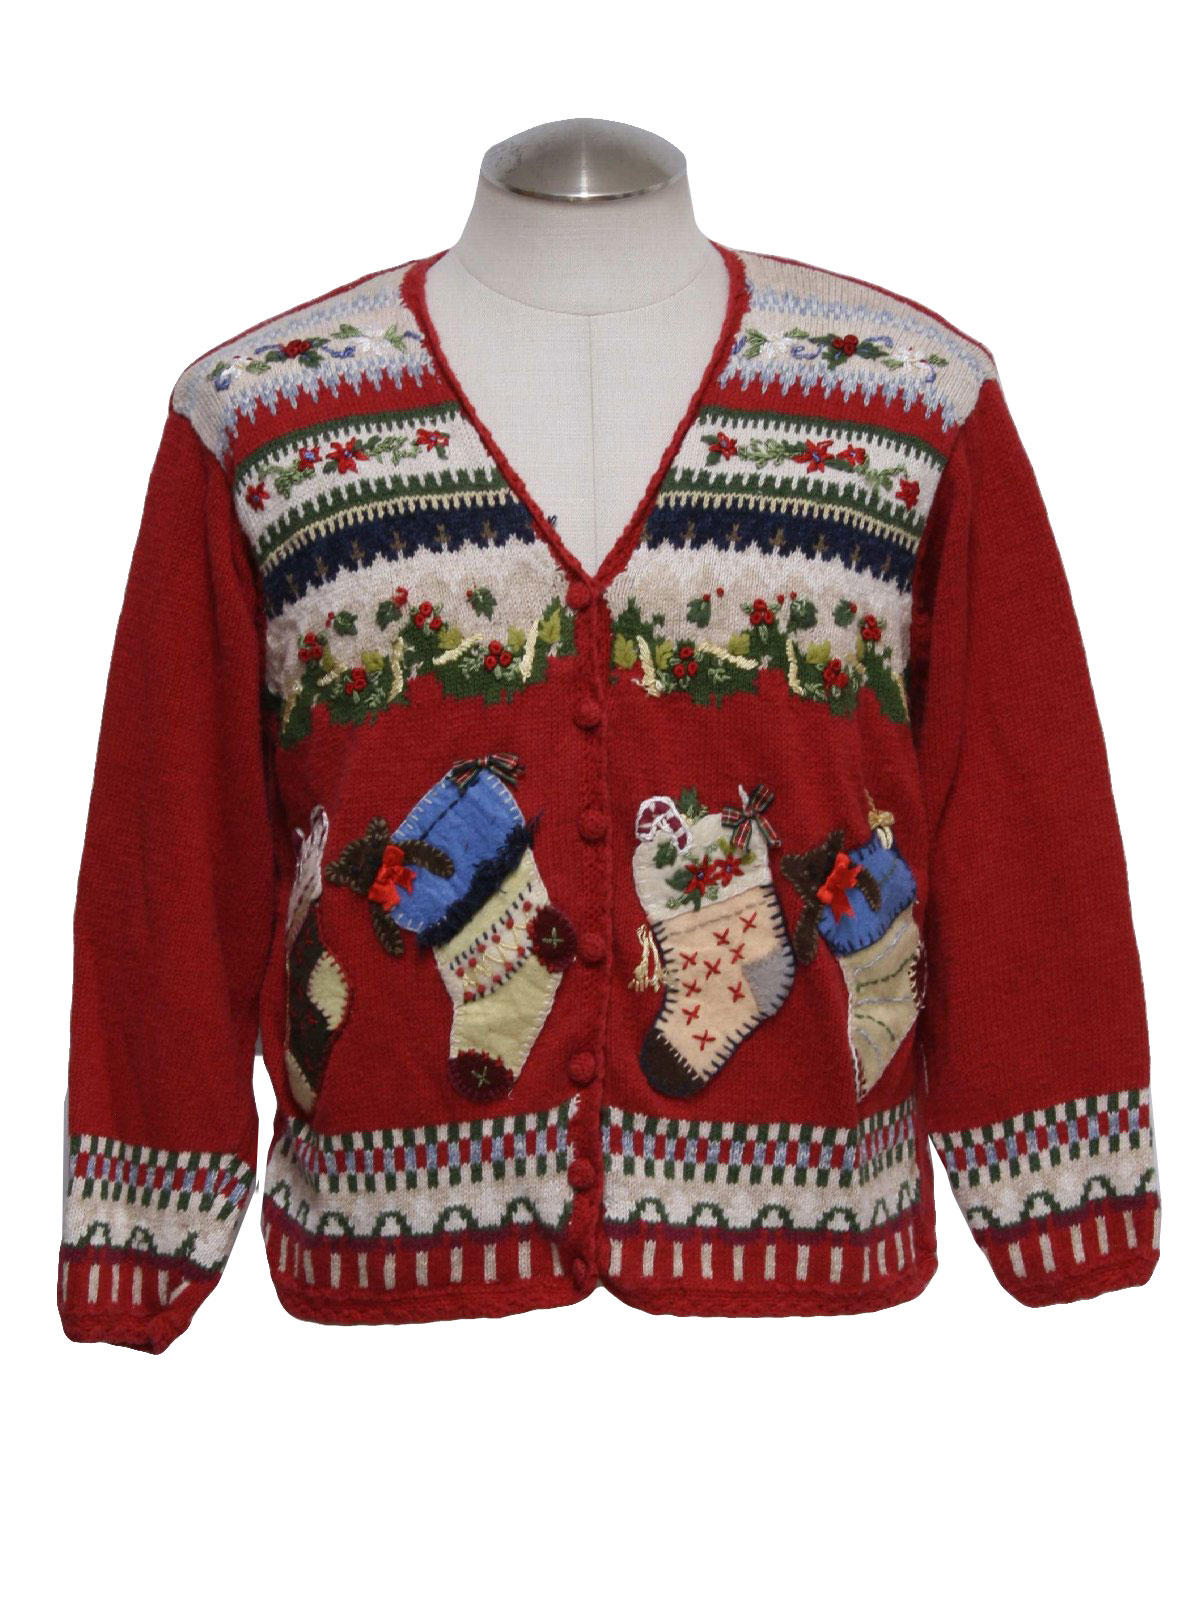 Womens Ugly Christmas Cardigan Sweater: -Carly St Claire- Womens red ...